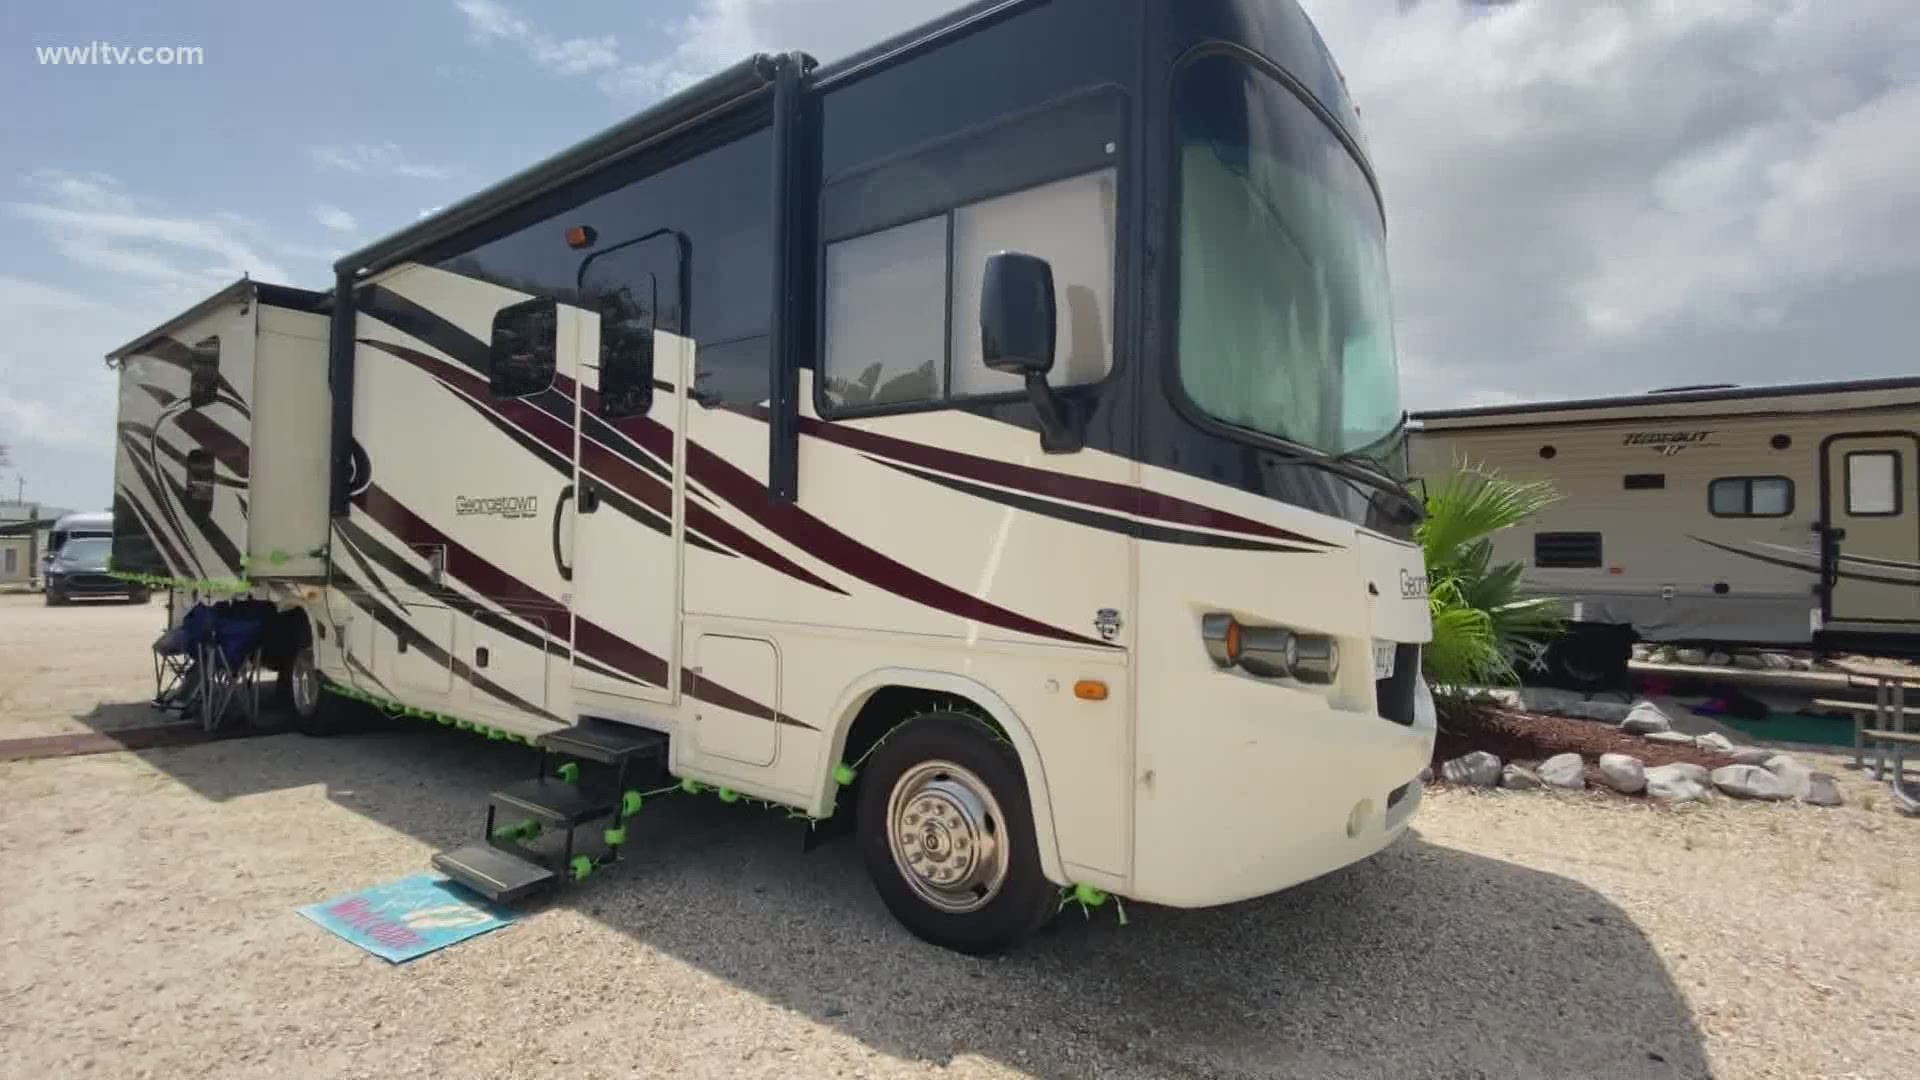 The RV association says that more than 40 million Americans plan to take an RV trip this year.